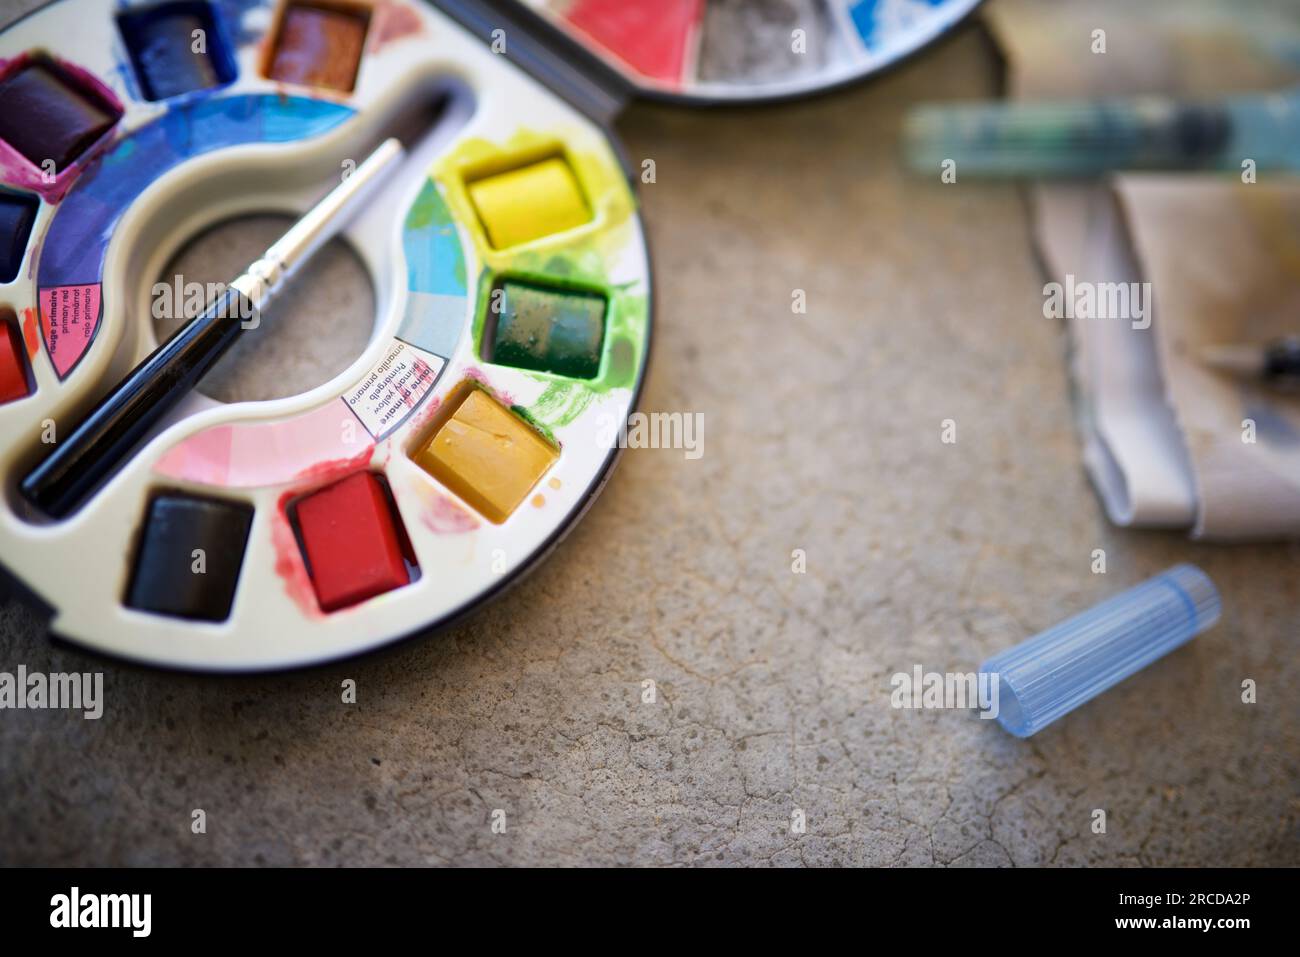 Box of watercolors and brushes on a table. Stock Photo